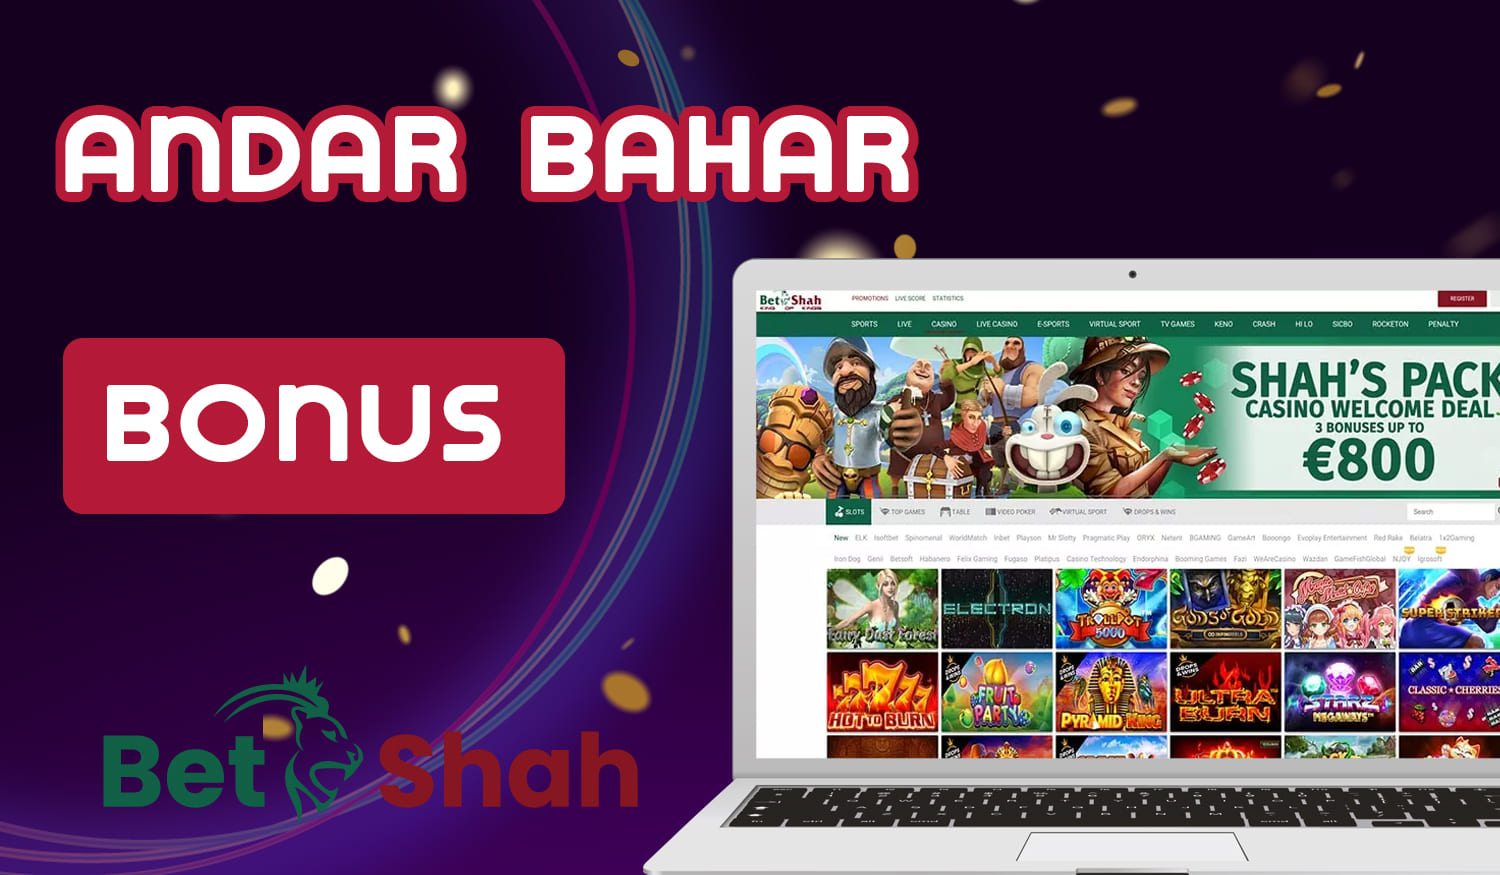 Bonuses and promotions available at BetShah casino and sports betting site